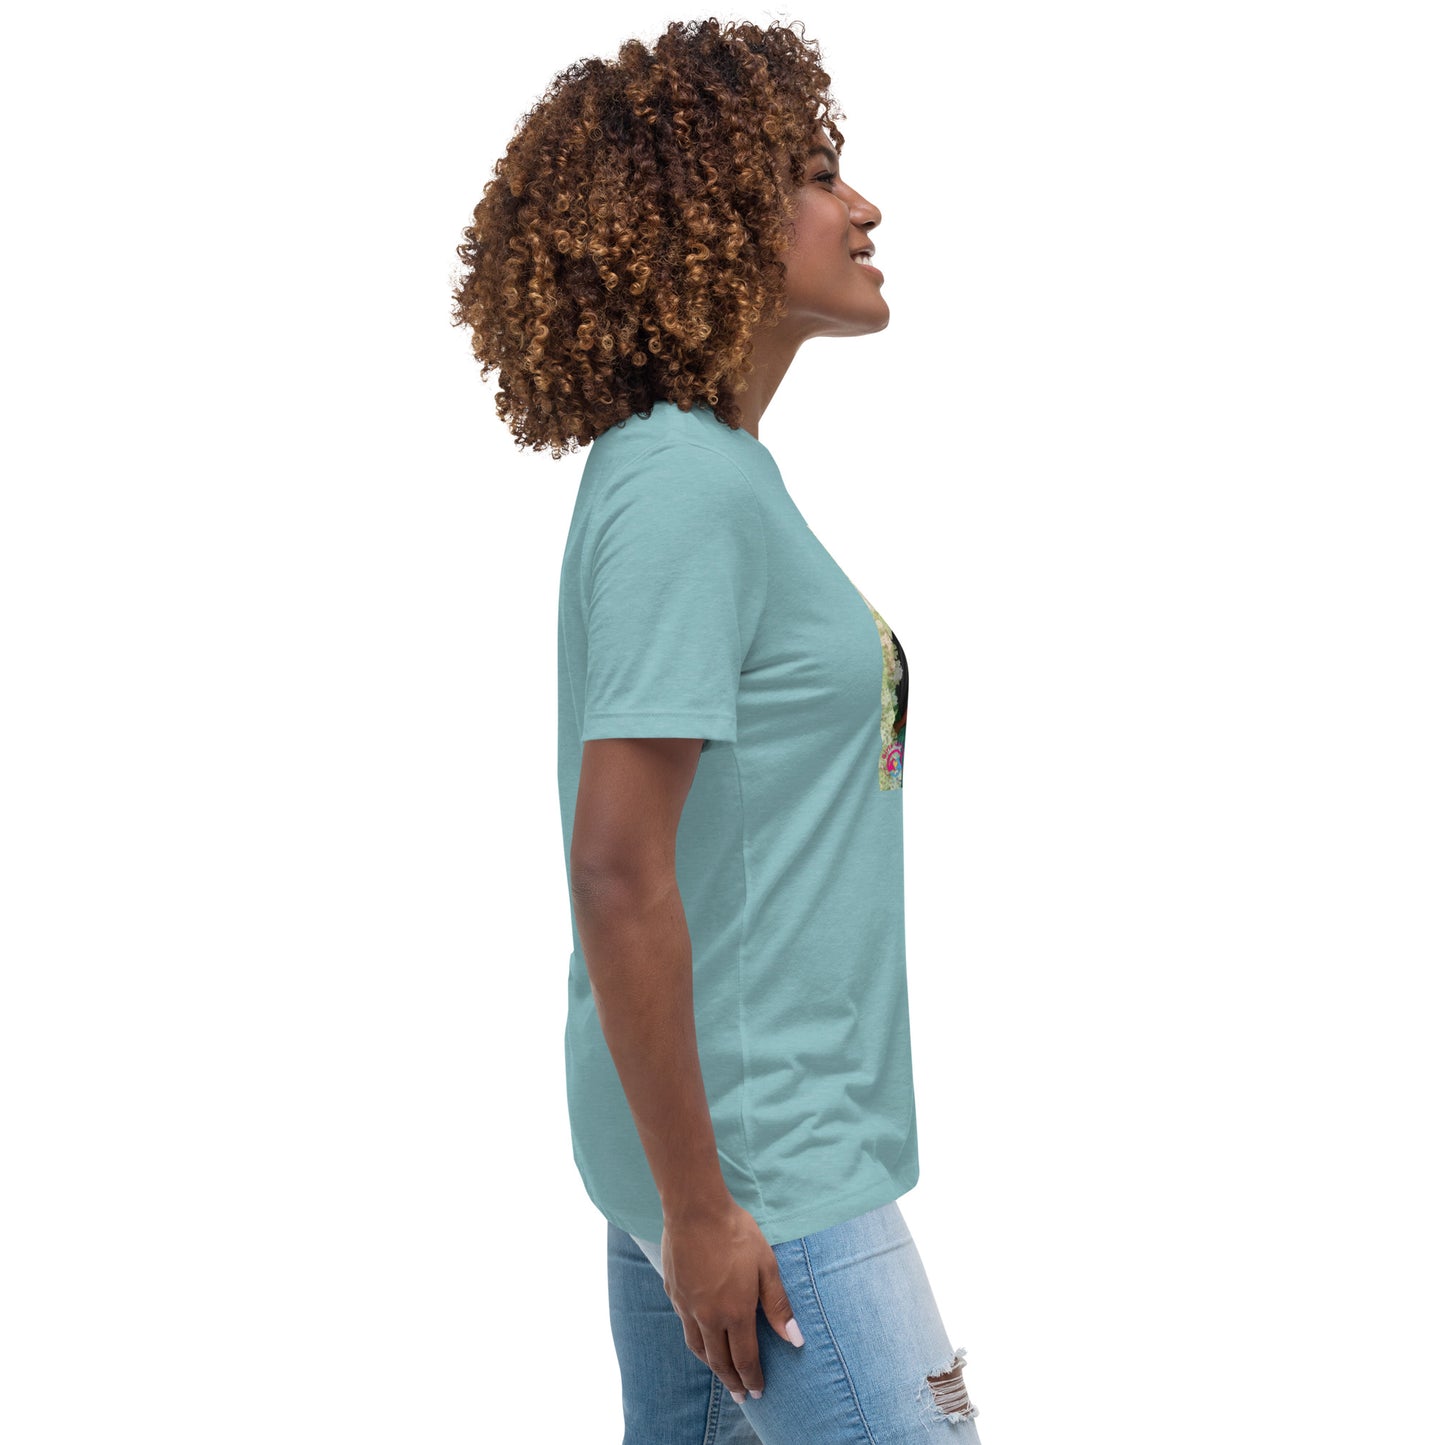 Girls United by Love Women's Relaxed T-Shirt, designed by Ocean Brown